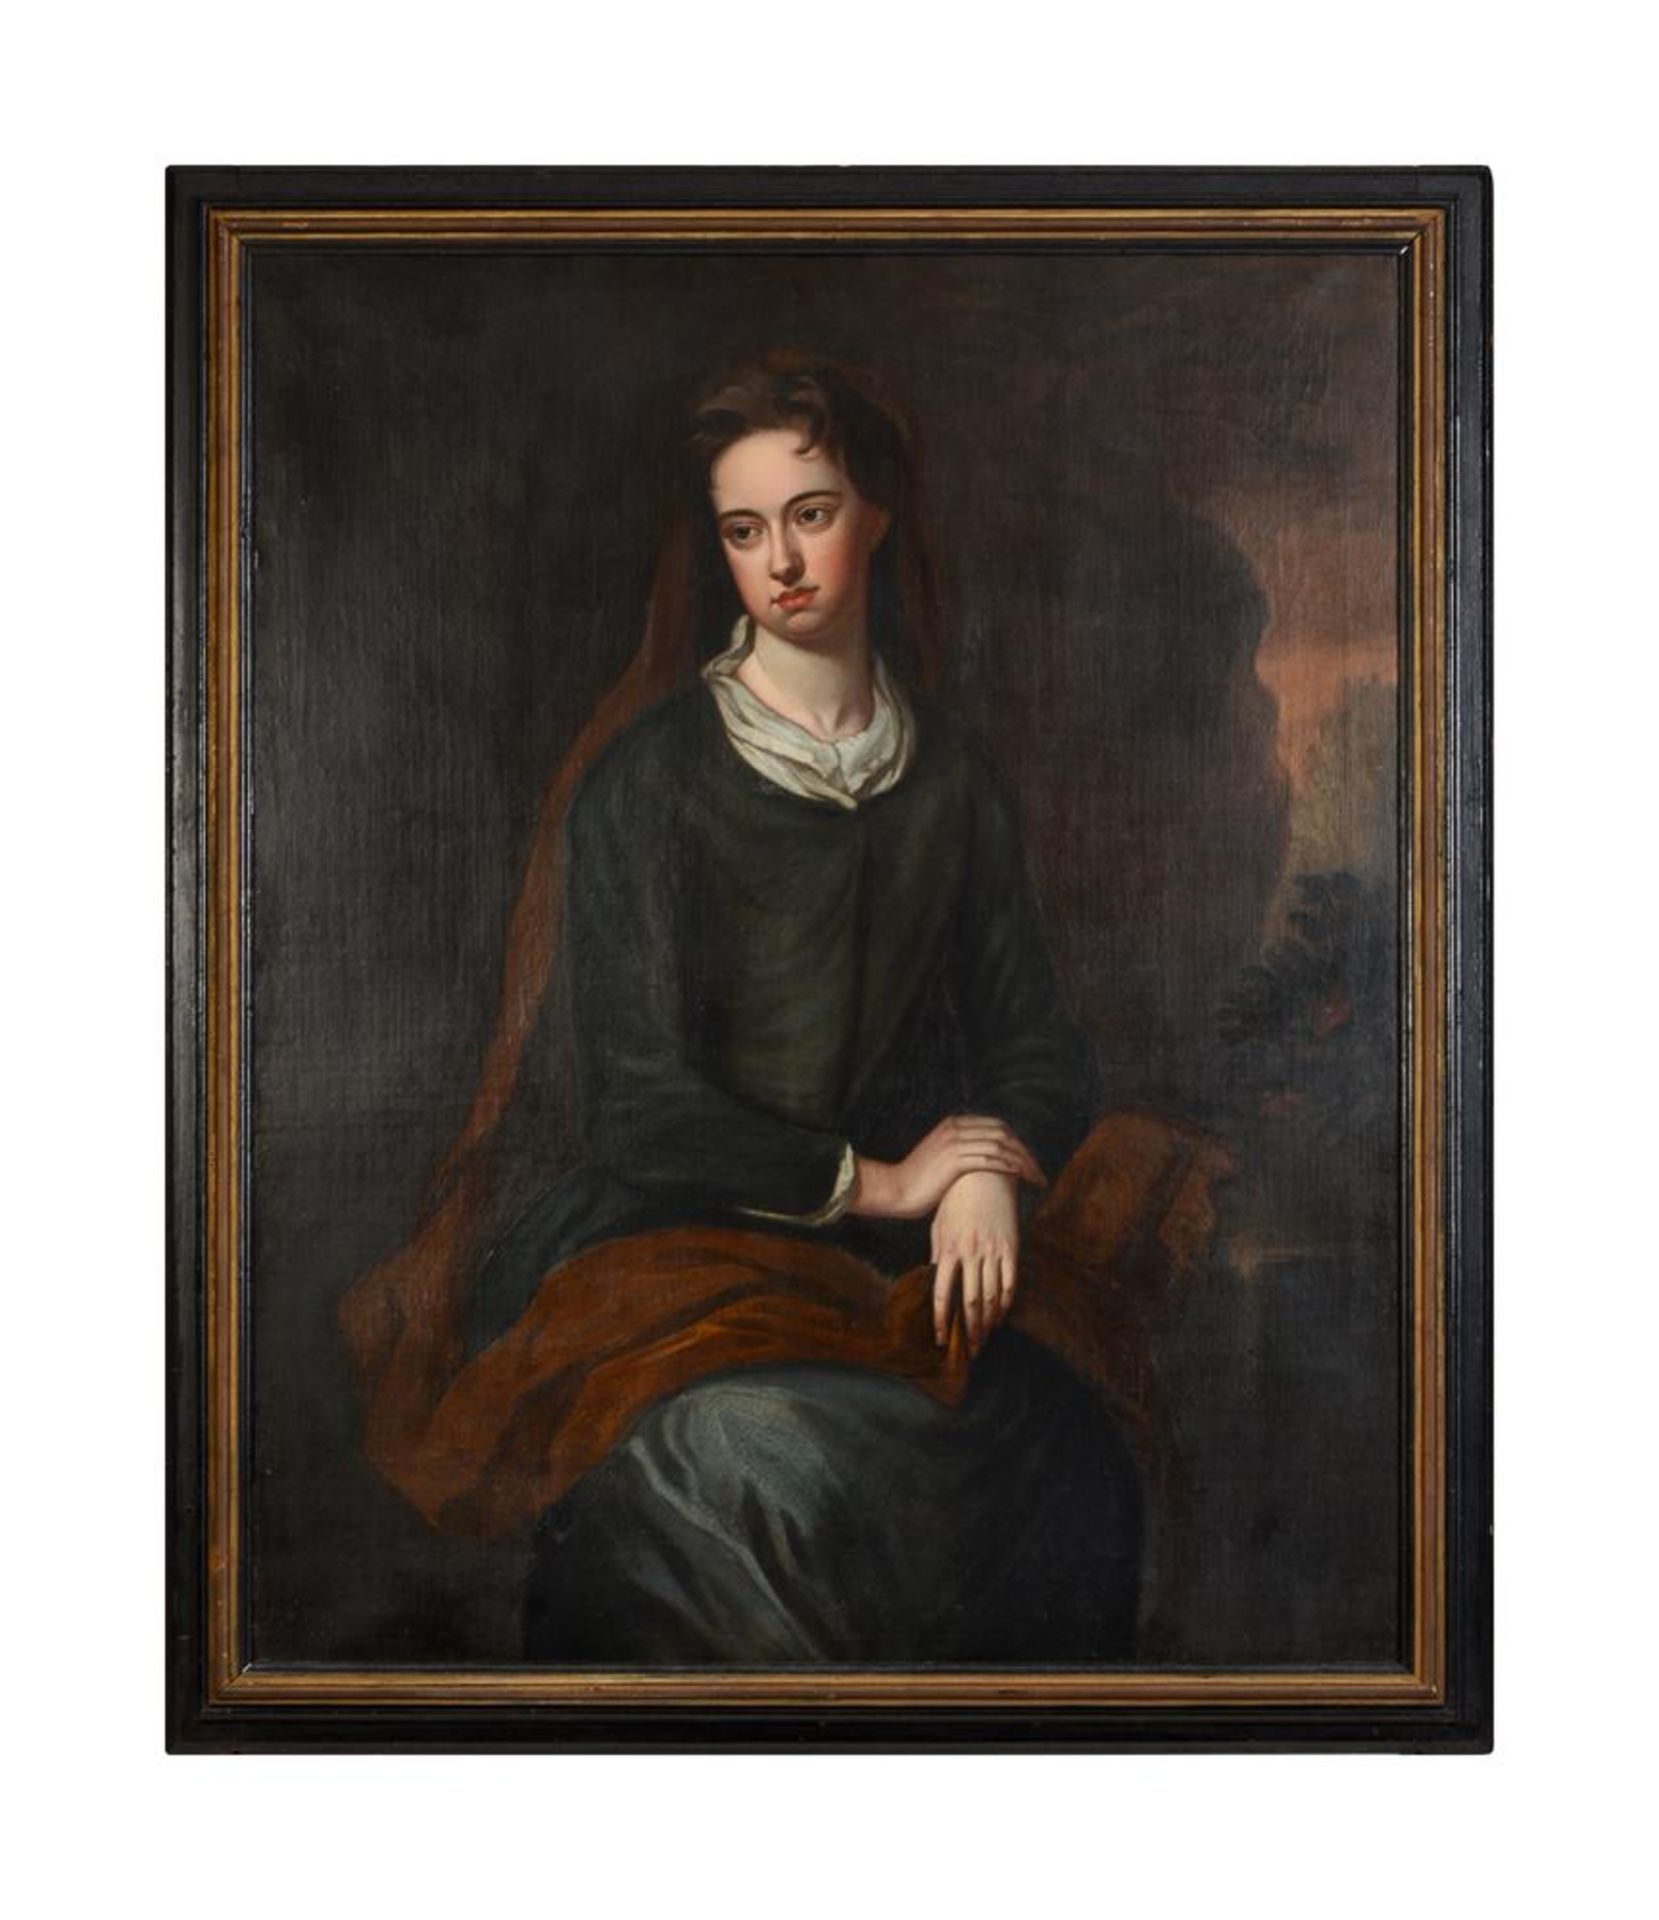 FOLLOWER OF SIR GODFREY KNELLER, PORTRAIT OF A LADY, POSSIBLY SARAH, DUCHESS OF MARLBOROUGH - Image 2 of 3